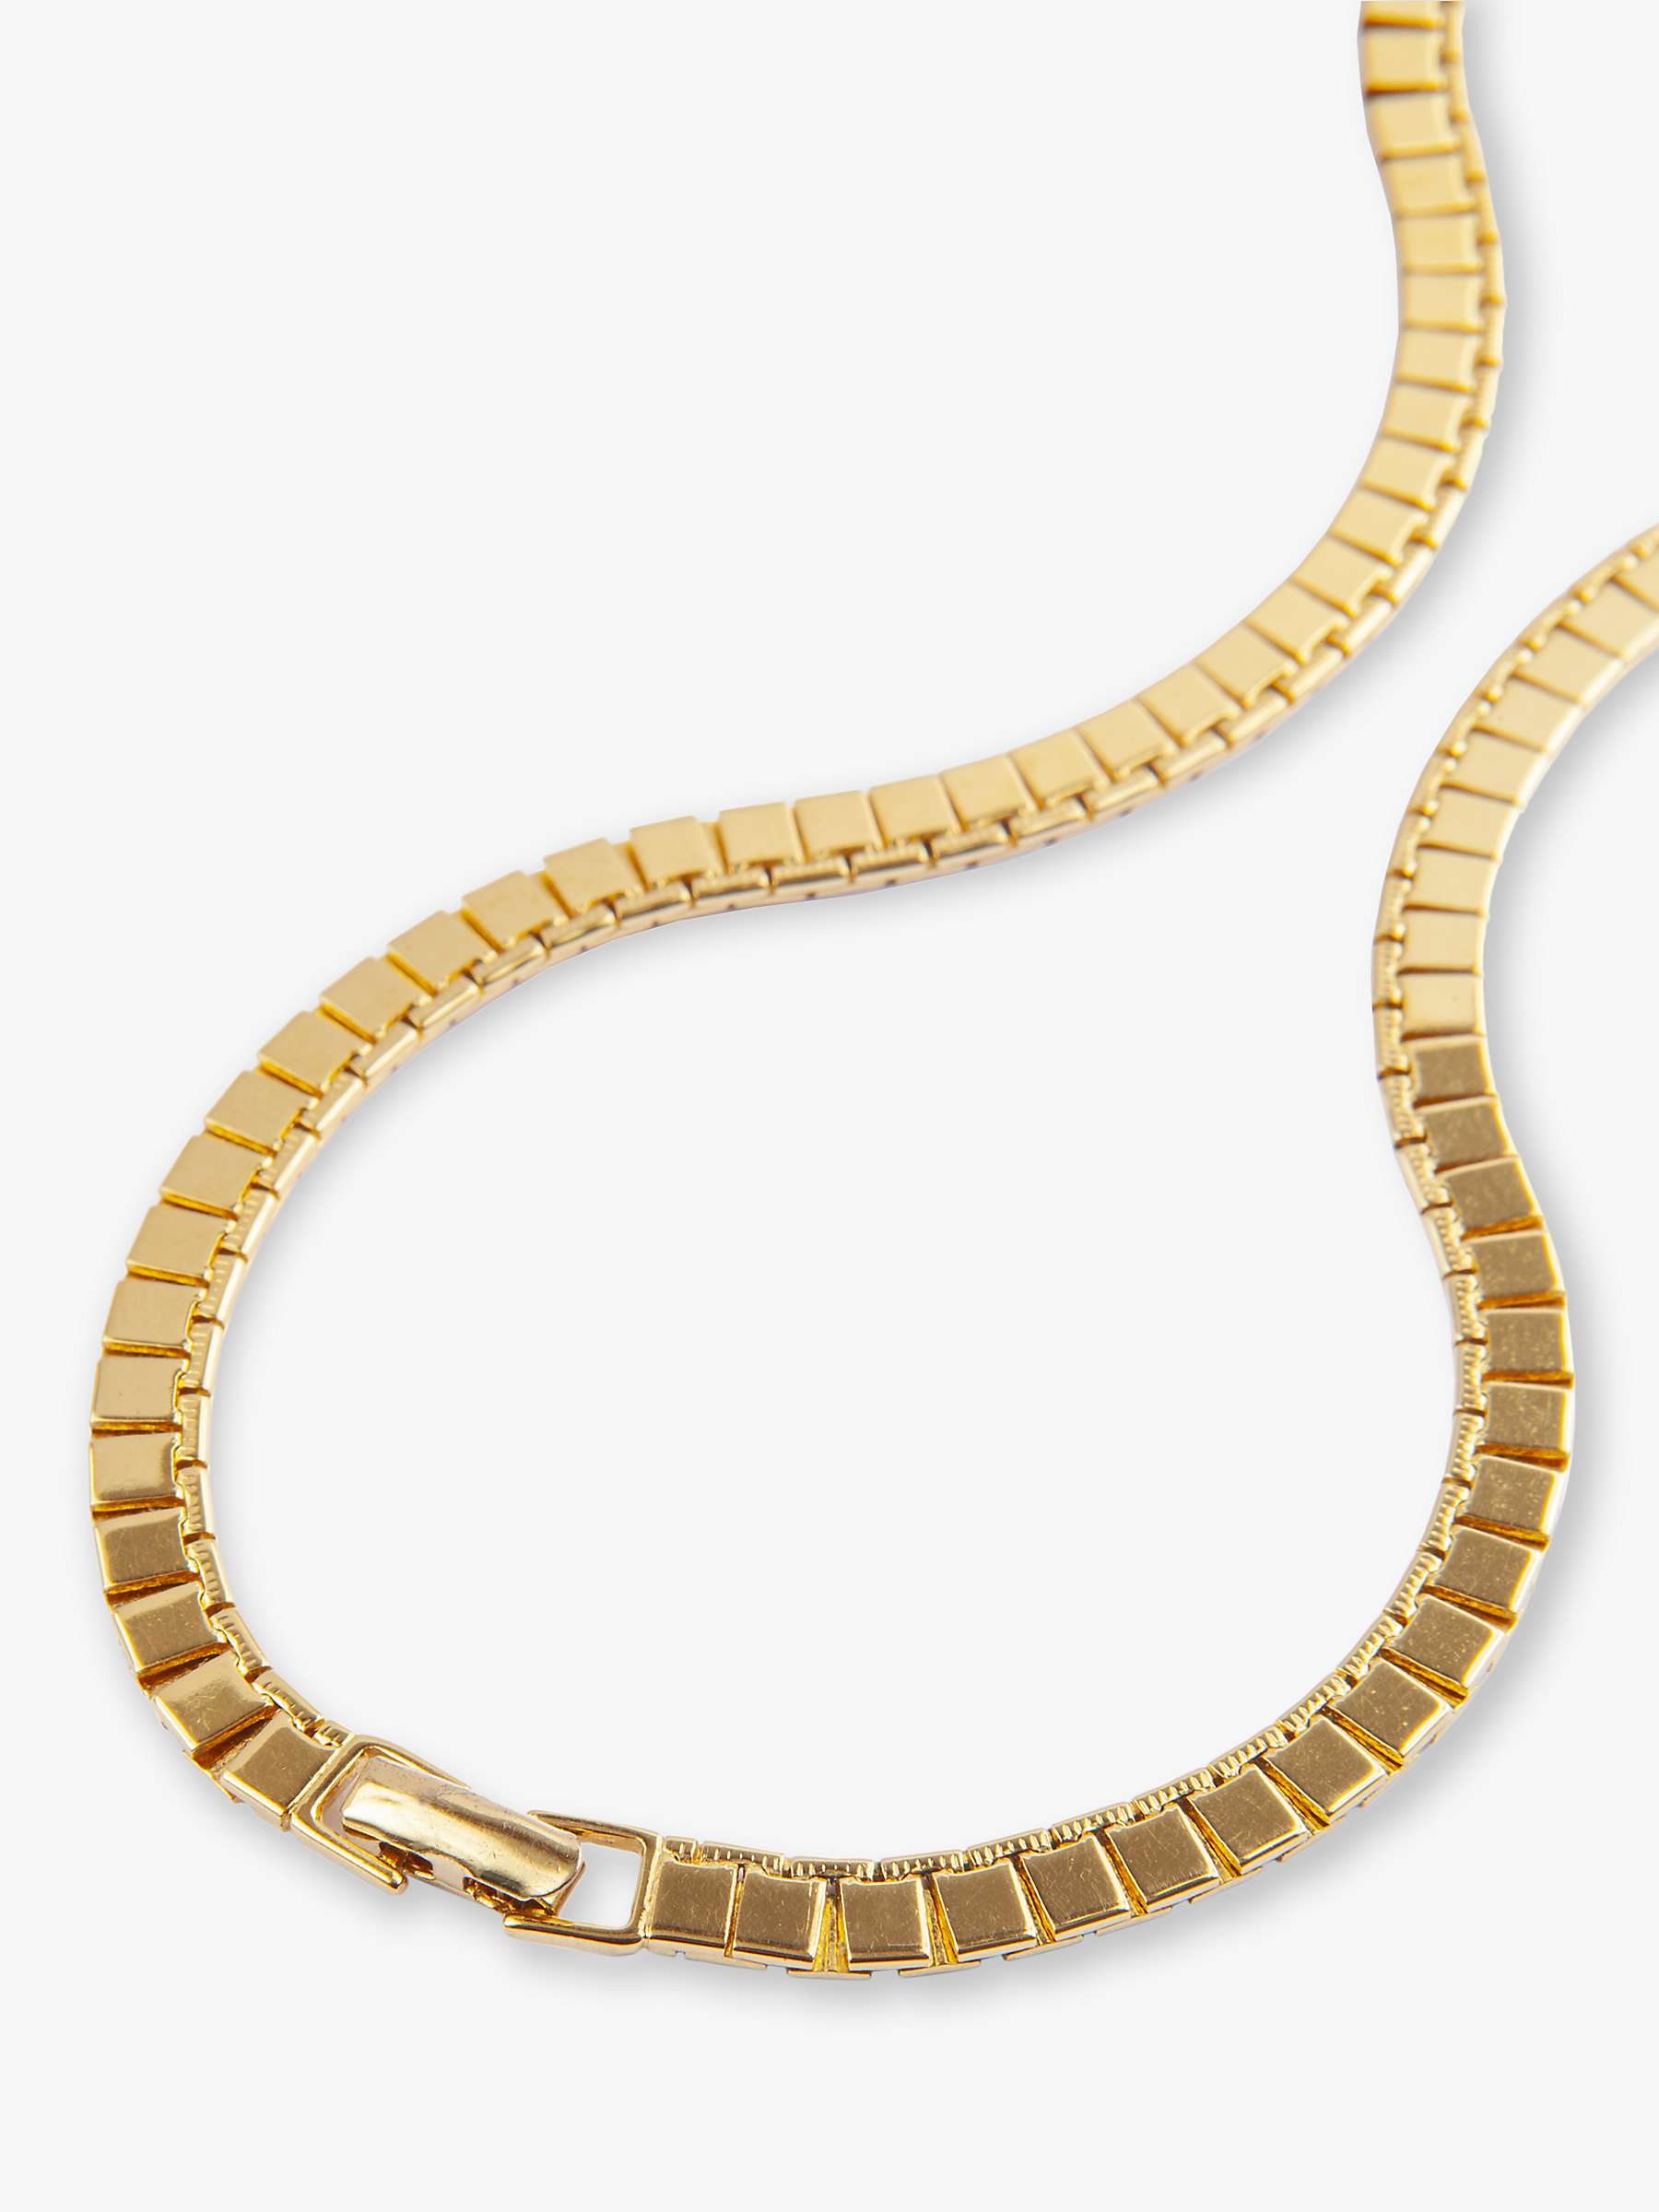 Buy Eclectica Vintage Monet 22ct Gold Plated Collar Necklace, Dated Circa 1980s Online at johnlewis.com